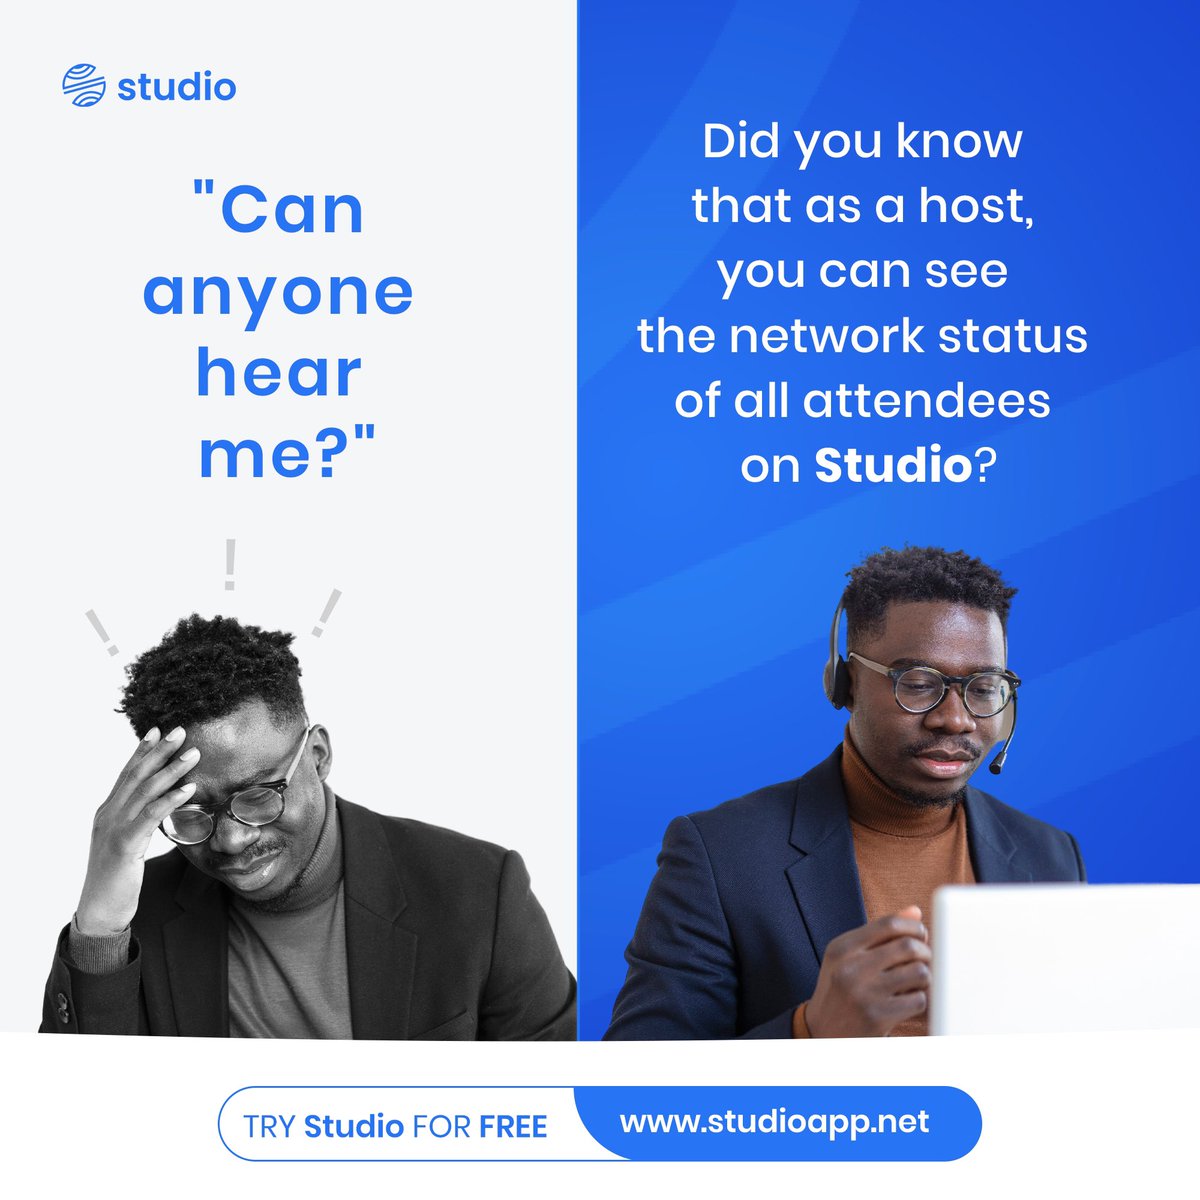 Discover the wonders of Studio's connection status feature, providing you insights into your device's network strength. Plus, as a host, gain the power to monitor the network status of all attendees in real-time during meetings. Pretty impressive, isn't it?

#onlinemeetings